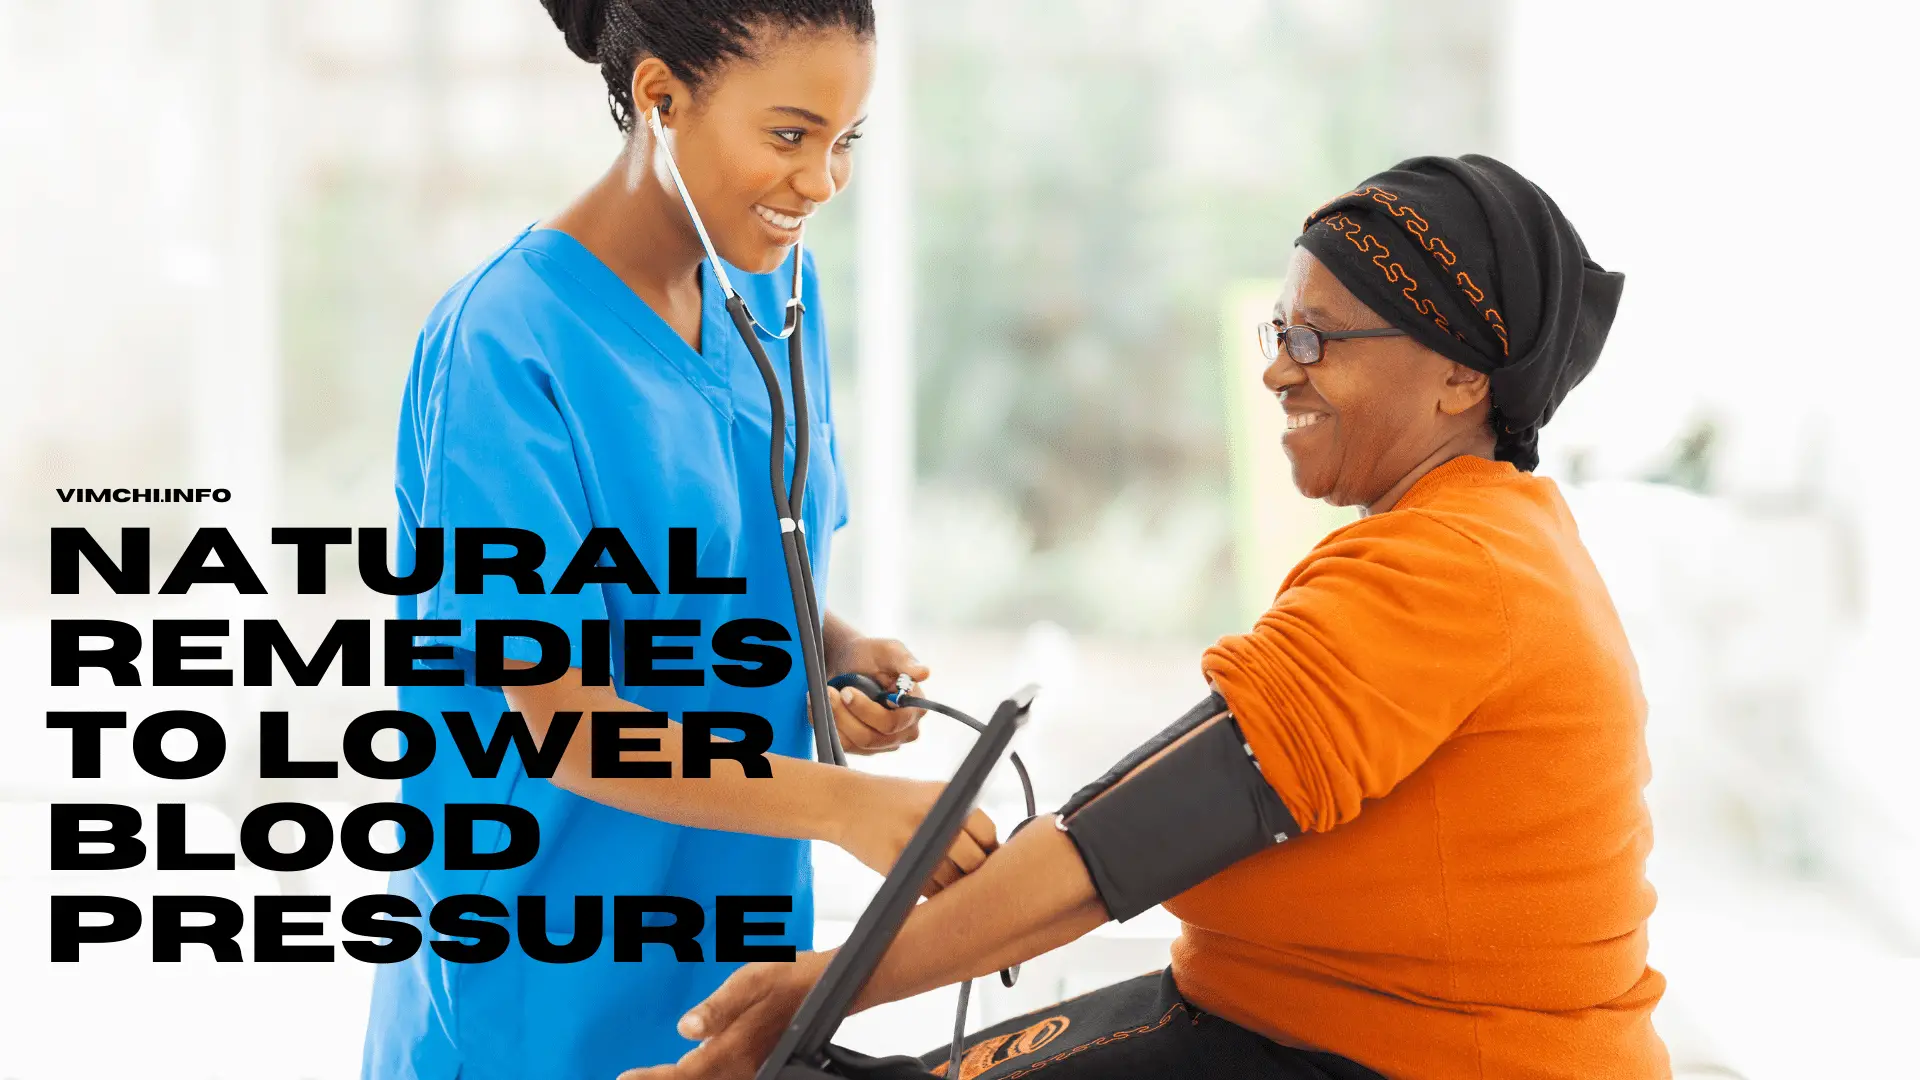 Natural Remedies to Lower Blood Pressure